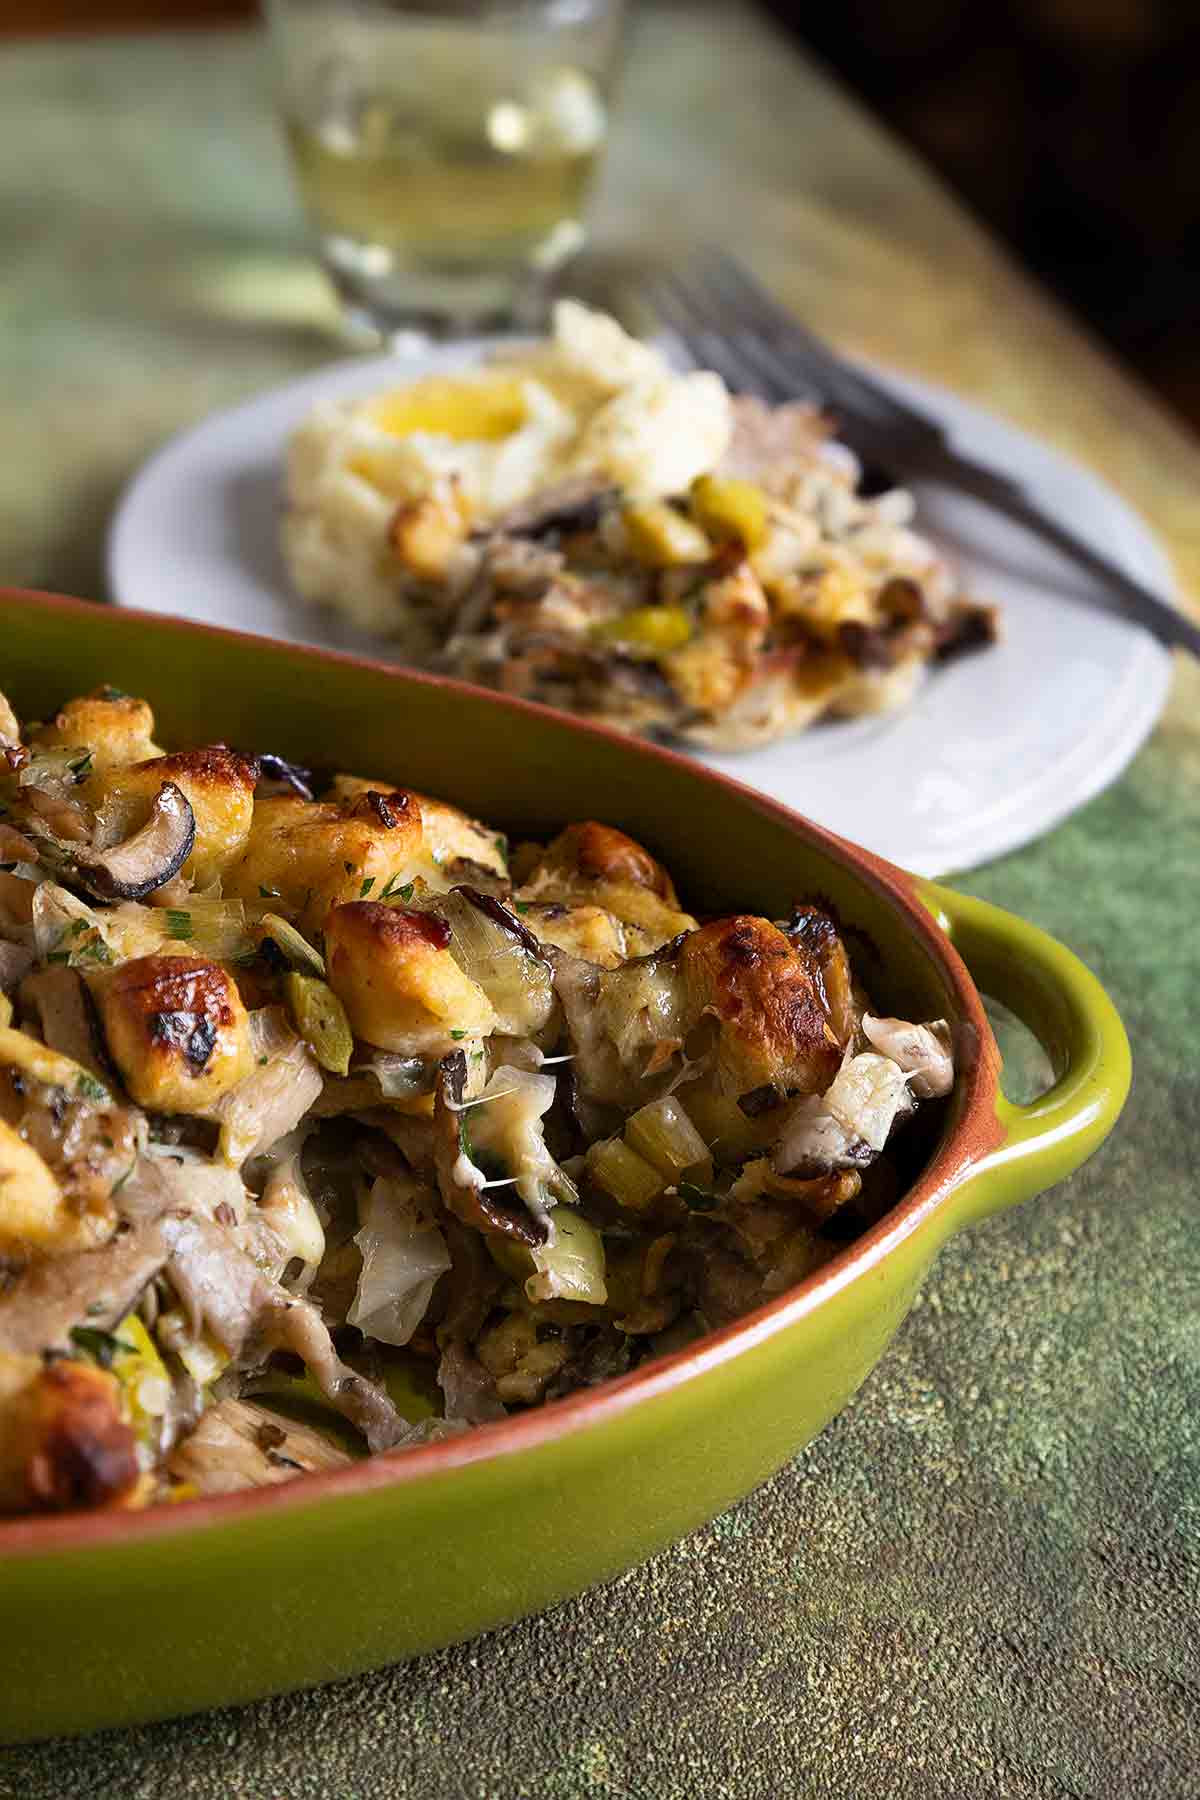 An oval casserole dish filled with wild mushroom stuffing and a plate of stuffing and mashed potatoes next to it.